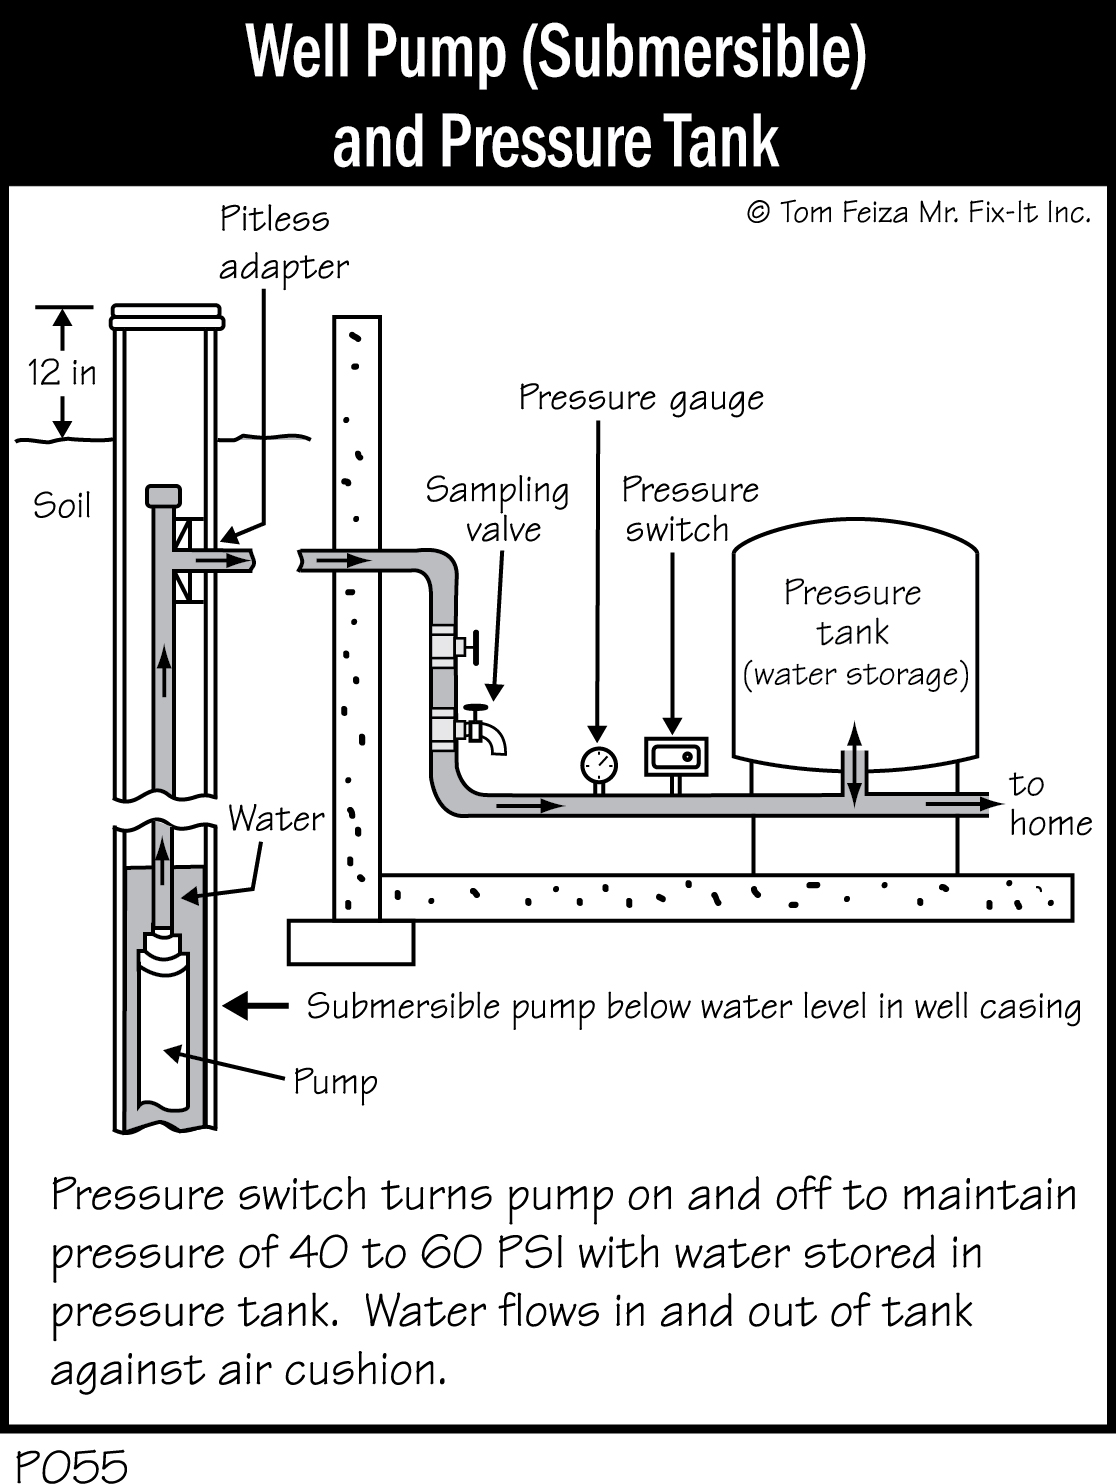 P055 - Well Pump and Pressure Tank, Submersible